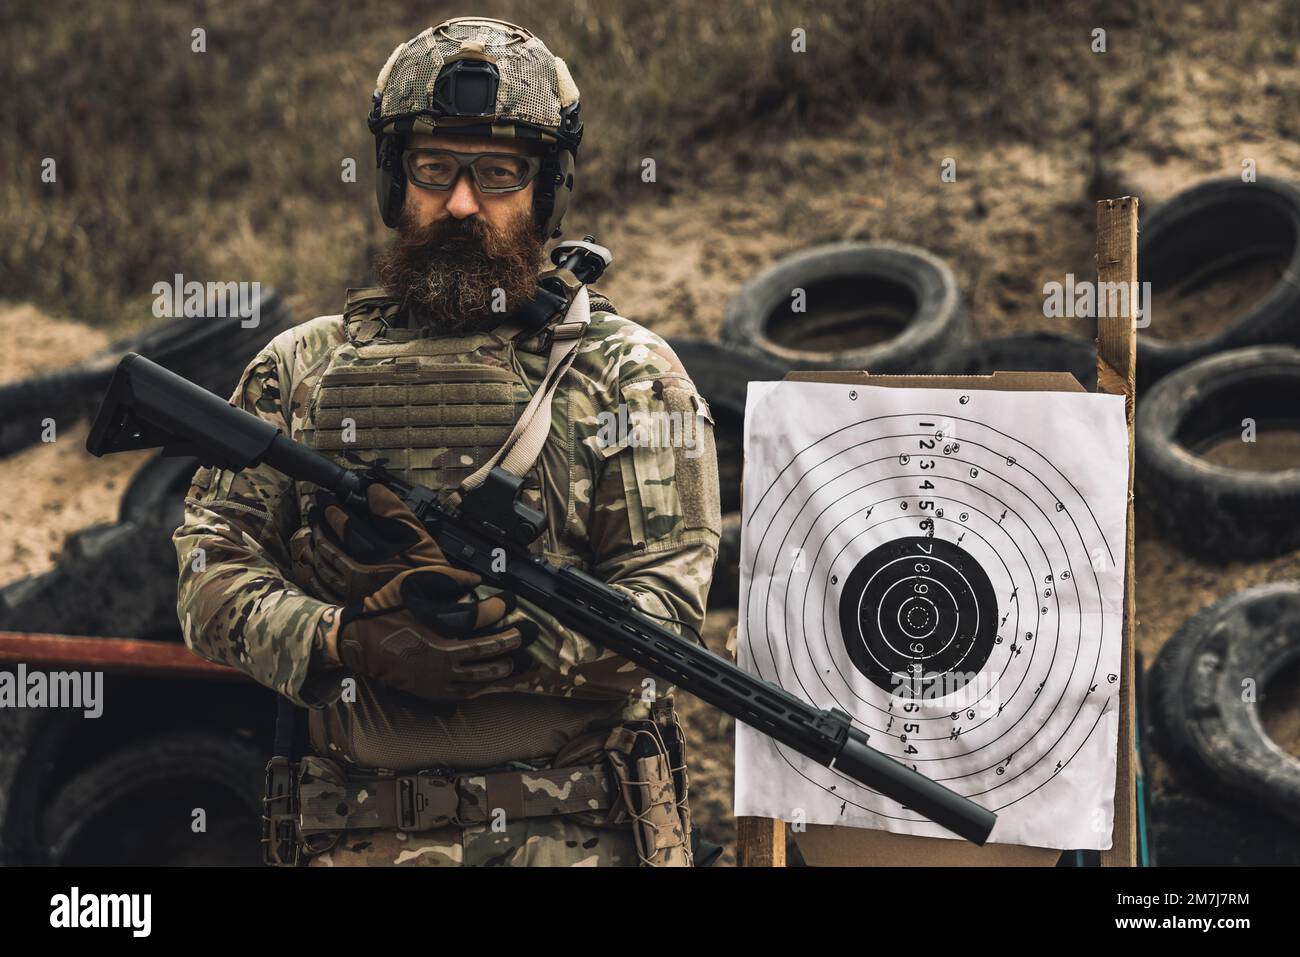 Mature soldier standing near the shooting target with rifle in hands Stock Photo